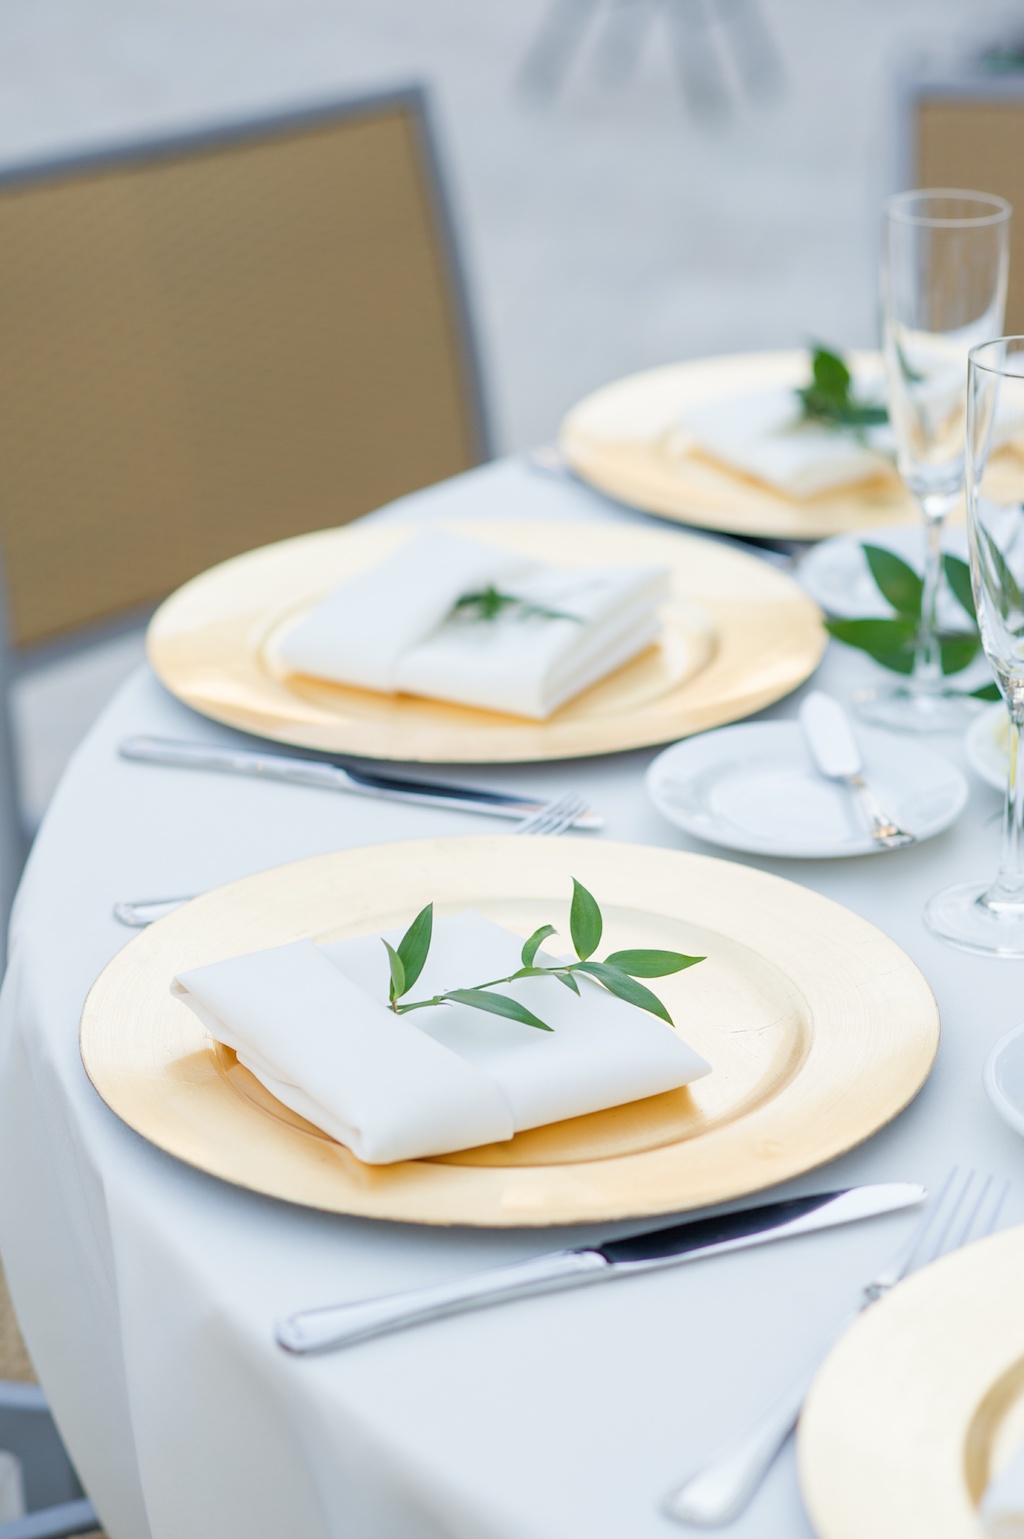 Simple Rustic Outdoor Wedding Reception Round Table Setting with Gold Charger, Silver Flatware, White Napkins and Linens with Greenery